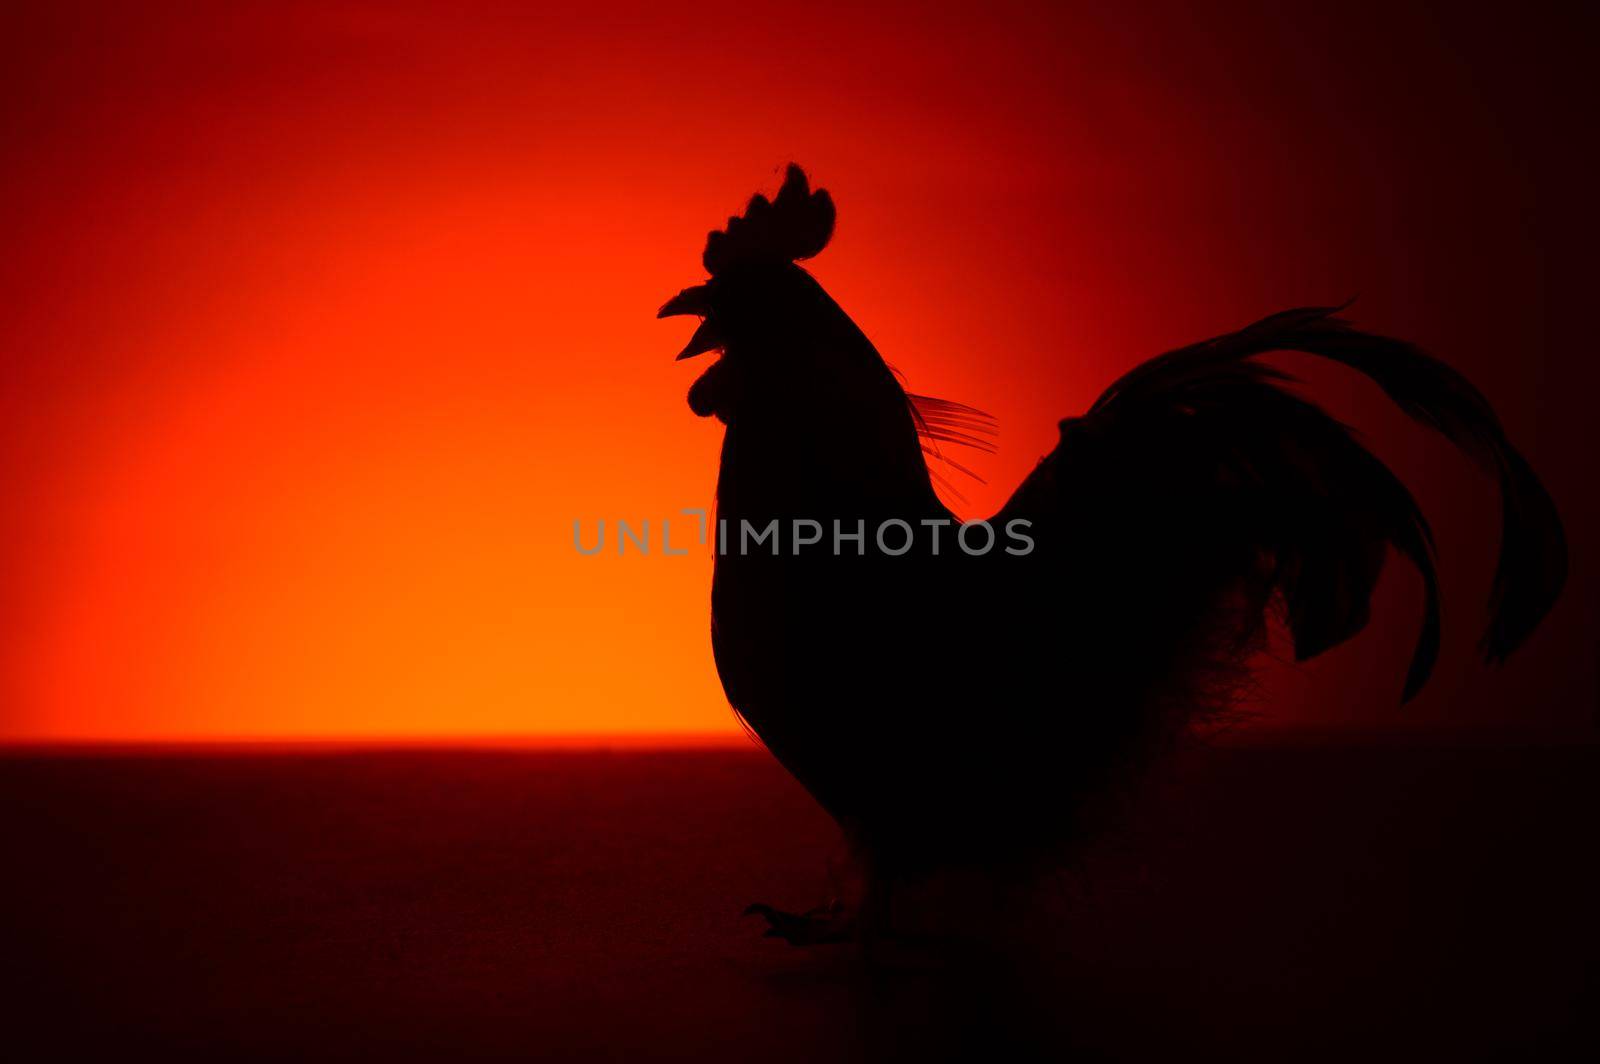 A silhouette of a Rooster during the morning red and orange hues of the sunrise.